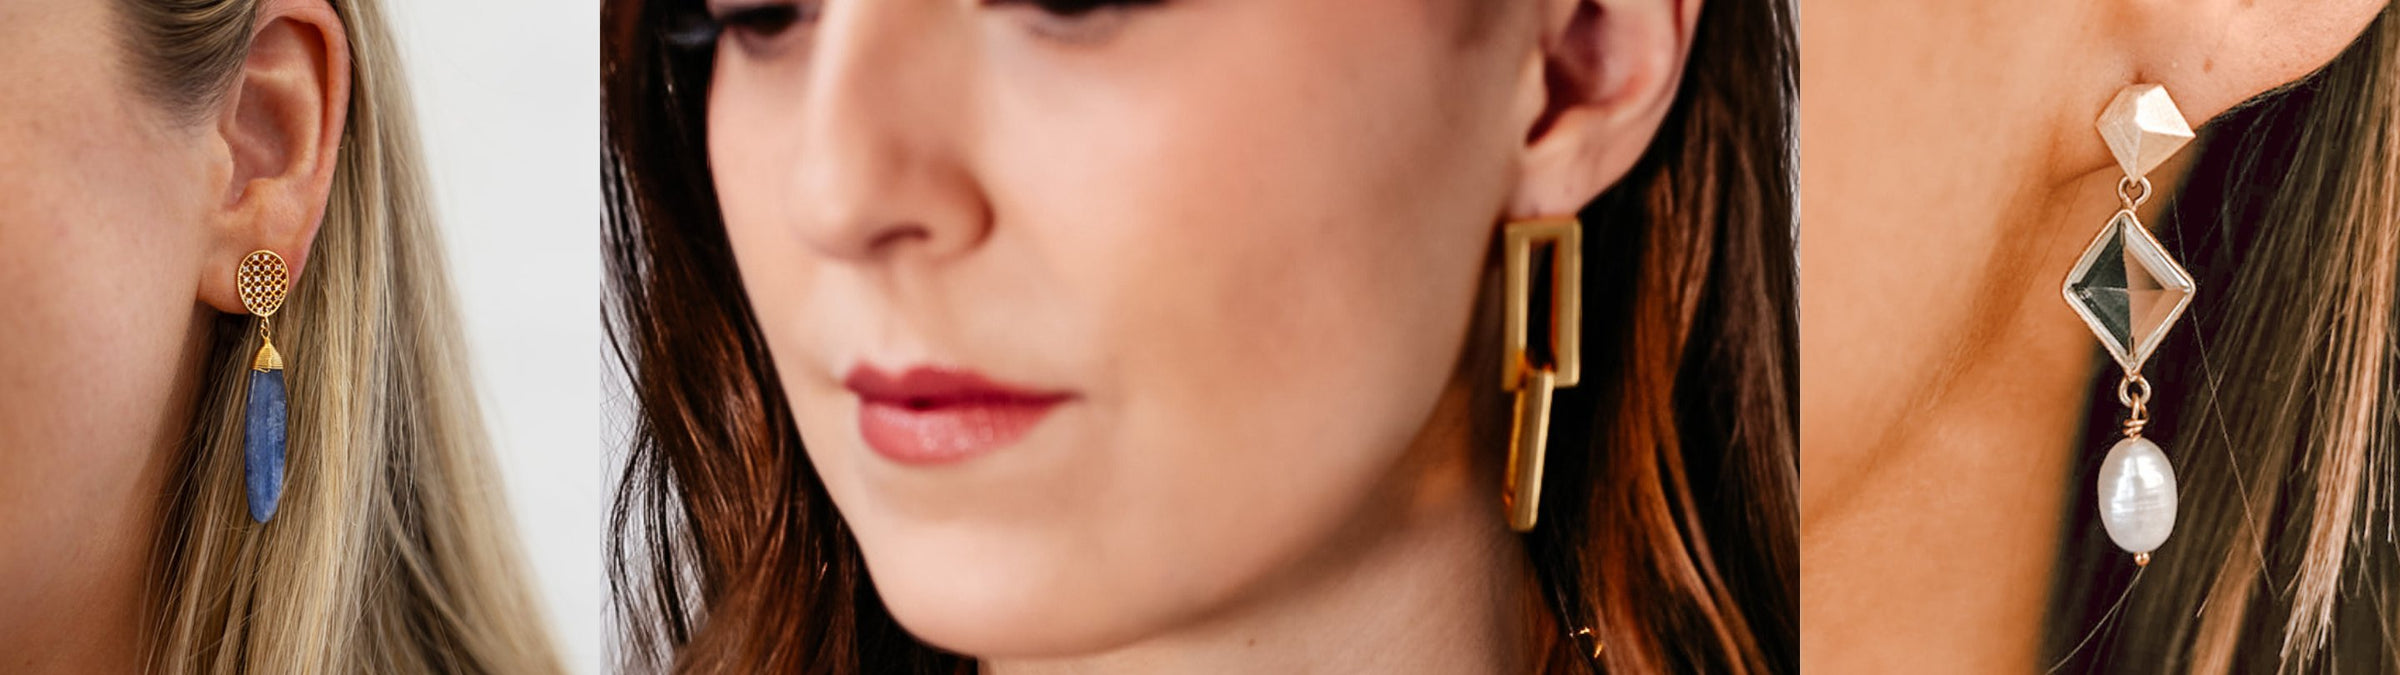 Collection header showcasing a variety of Loni Paul's Statement Earrings, modeled by women expressing their unique style.